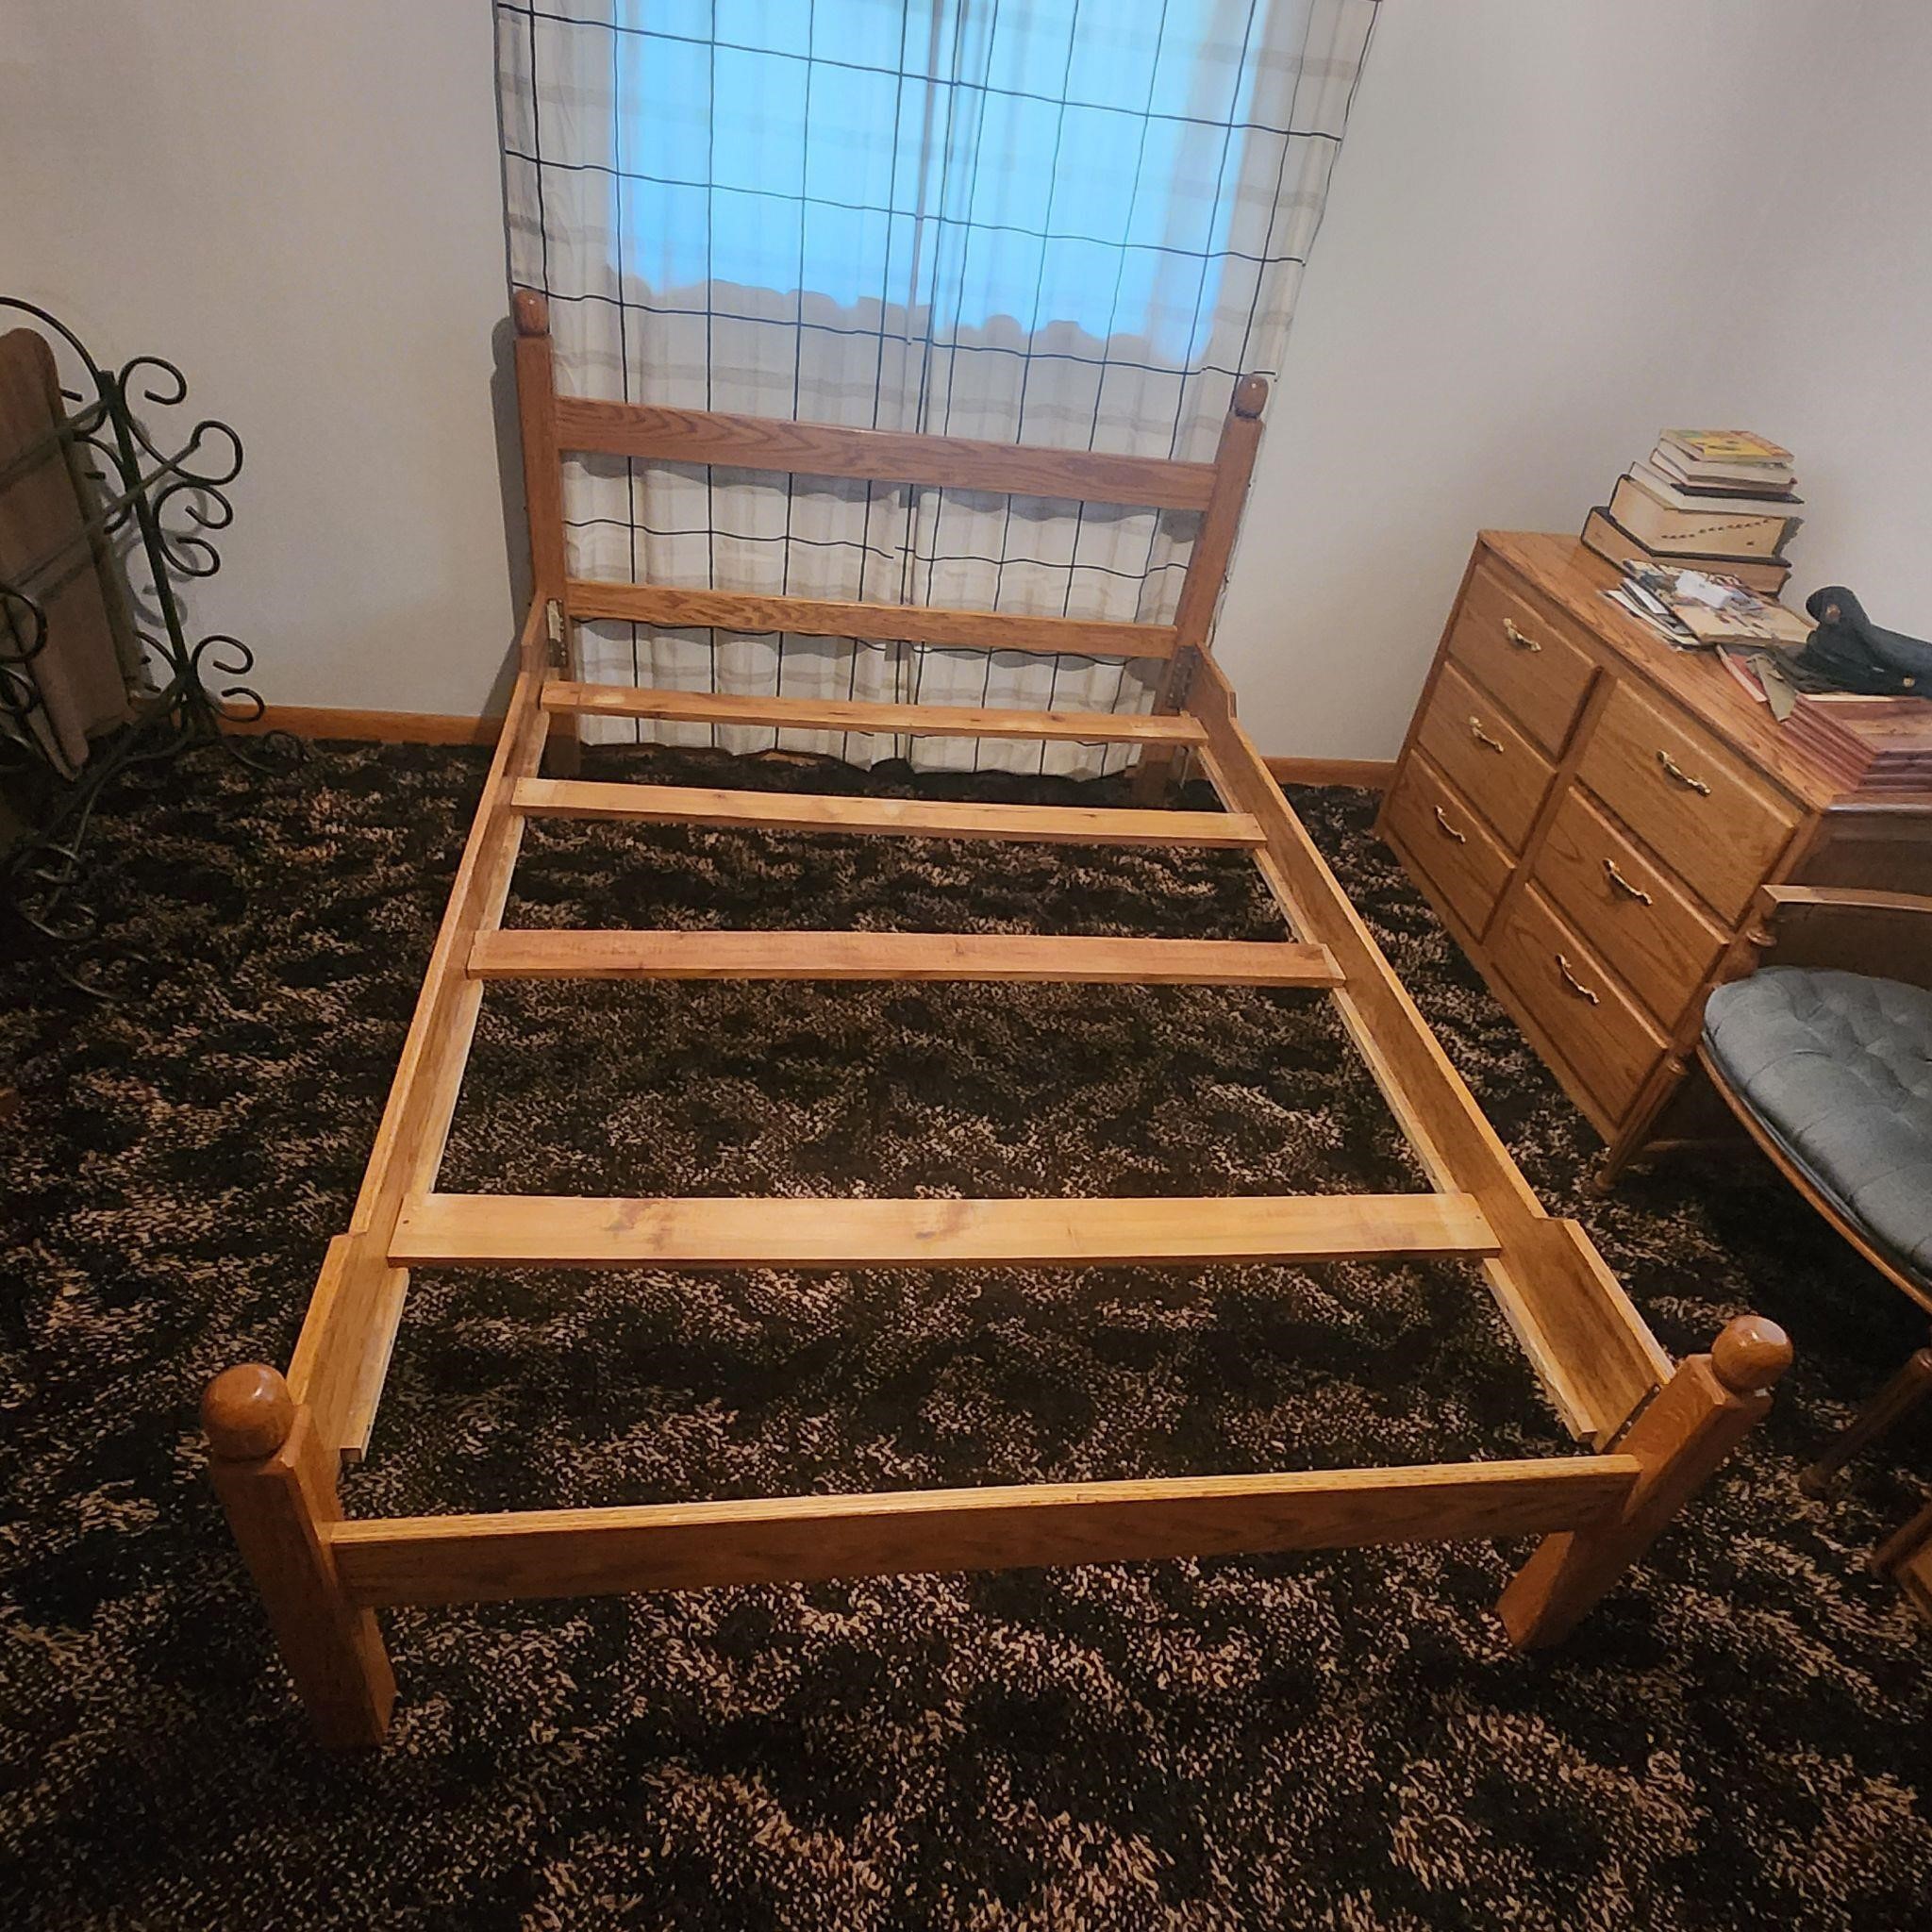 Hand made oak full size bed.